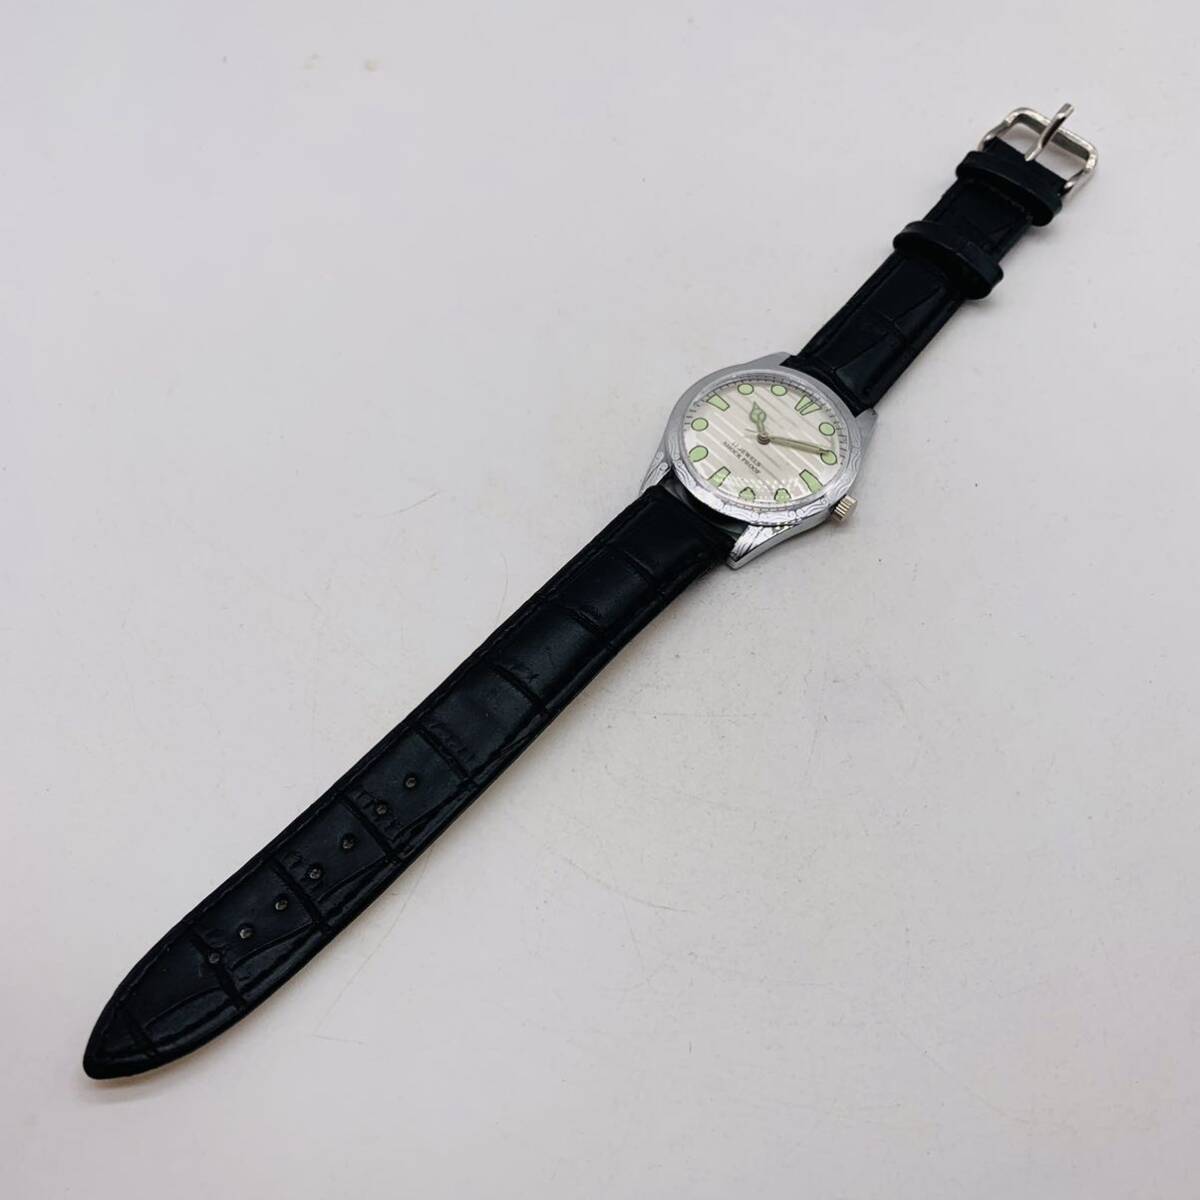 1 jpy start *OH settled *FHF* phone te melon * white *1980s* used men's wristwatch * machine hand winding * antique watch * Vintage watch 